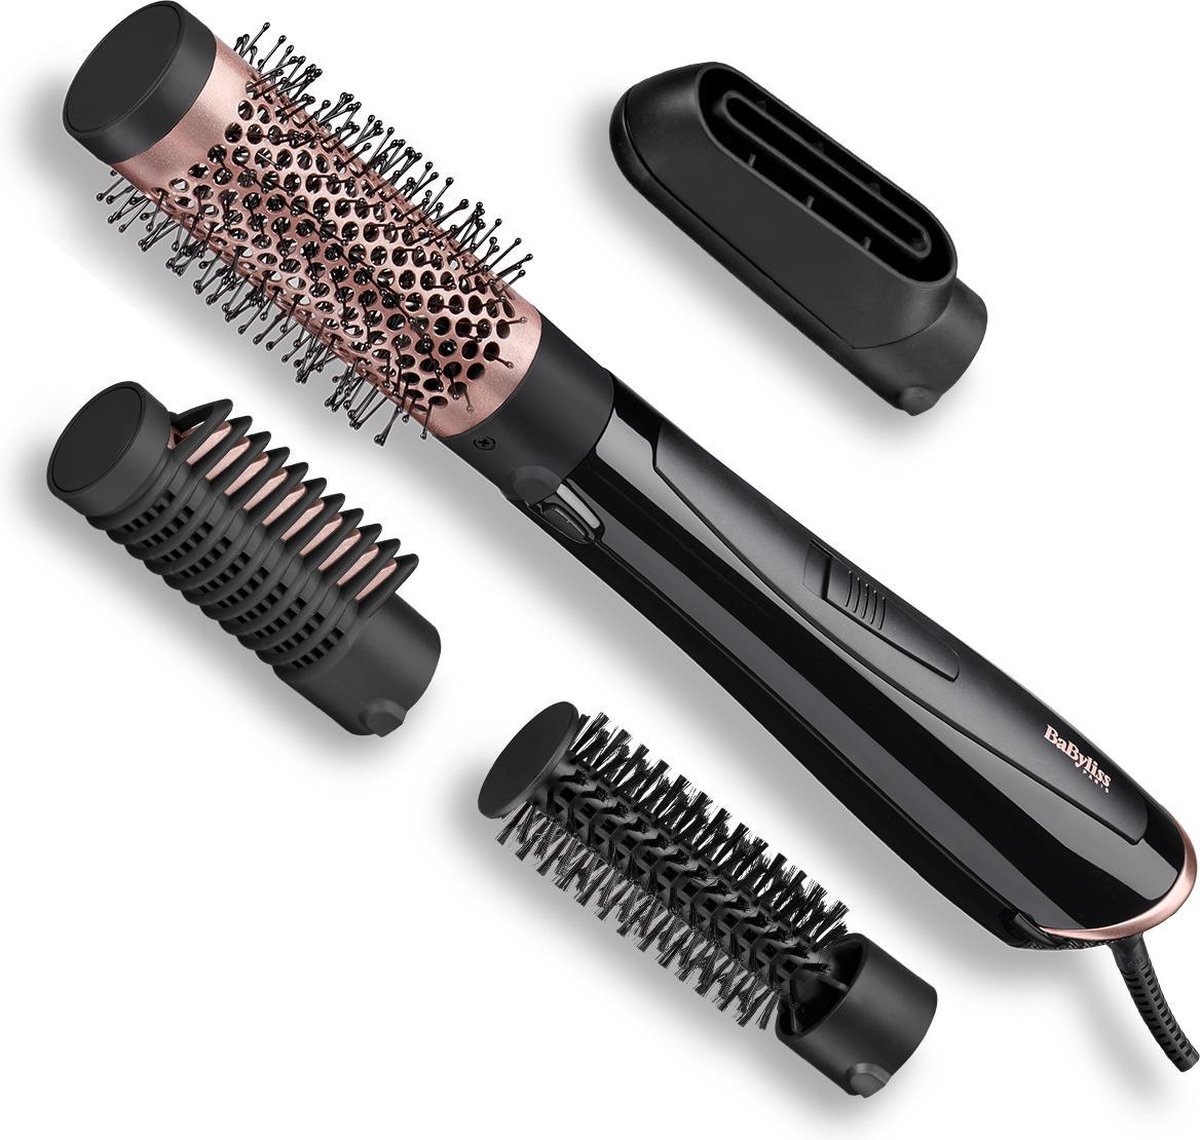 5. BaByliss Perfect Finish AS126E